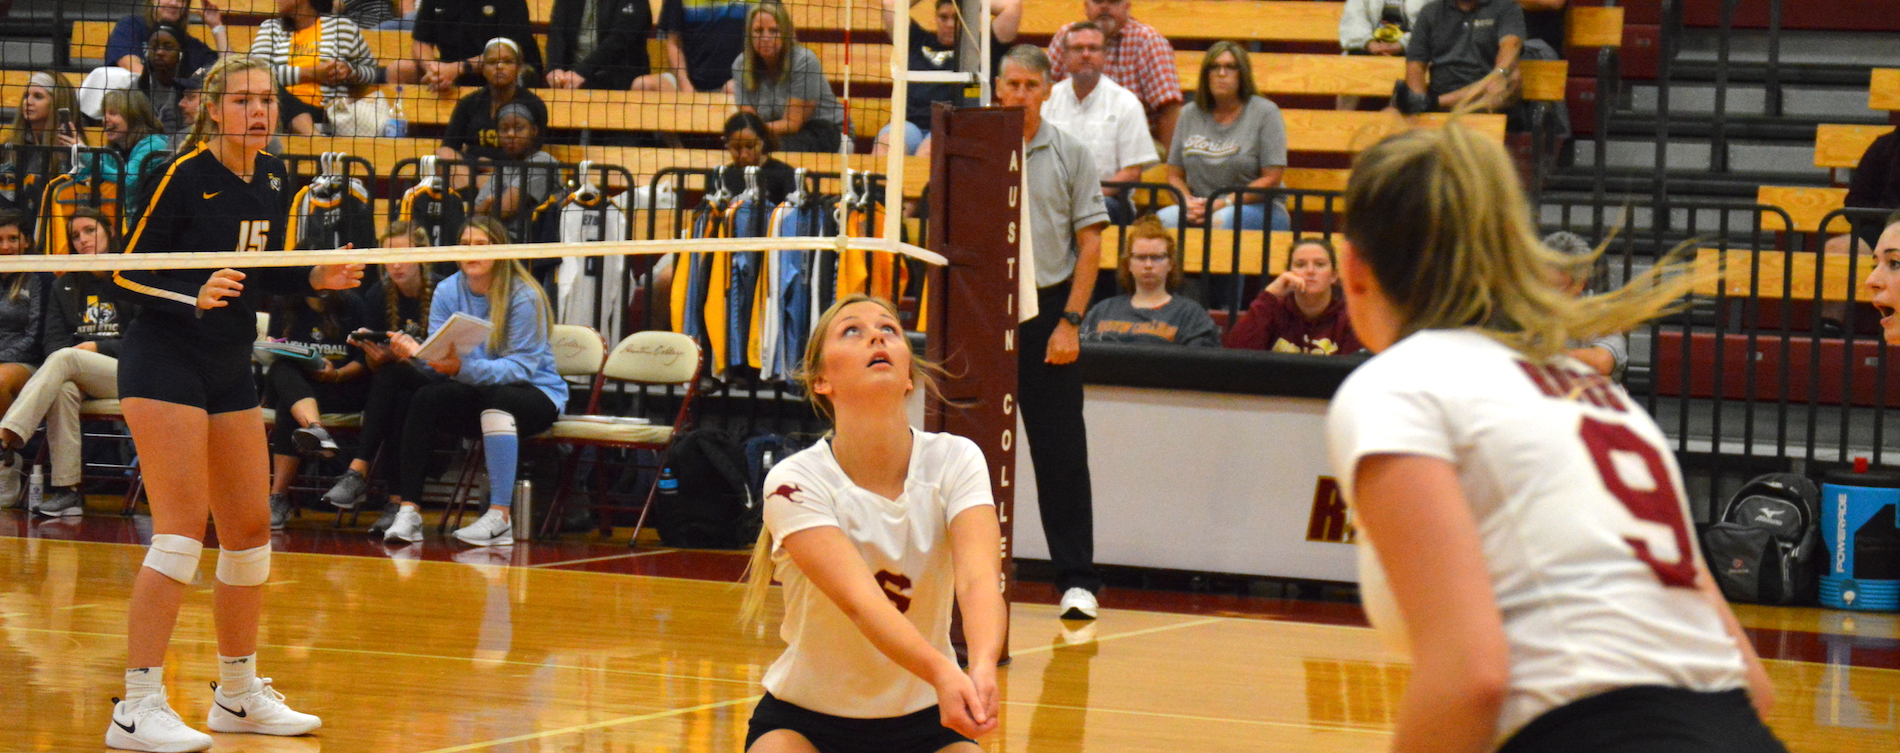 'Roos Drop Two to Open AC Classic